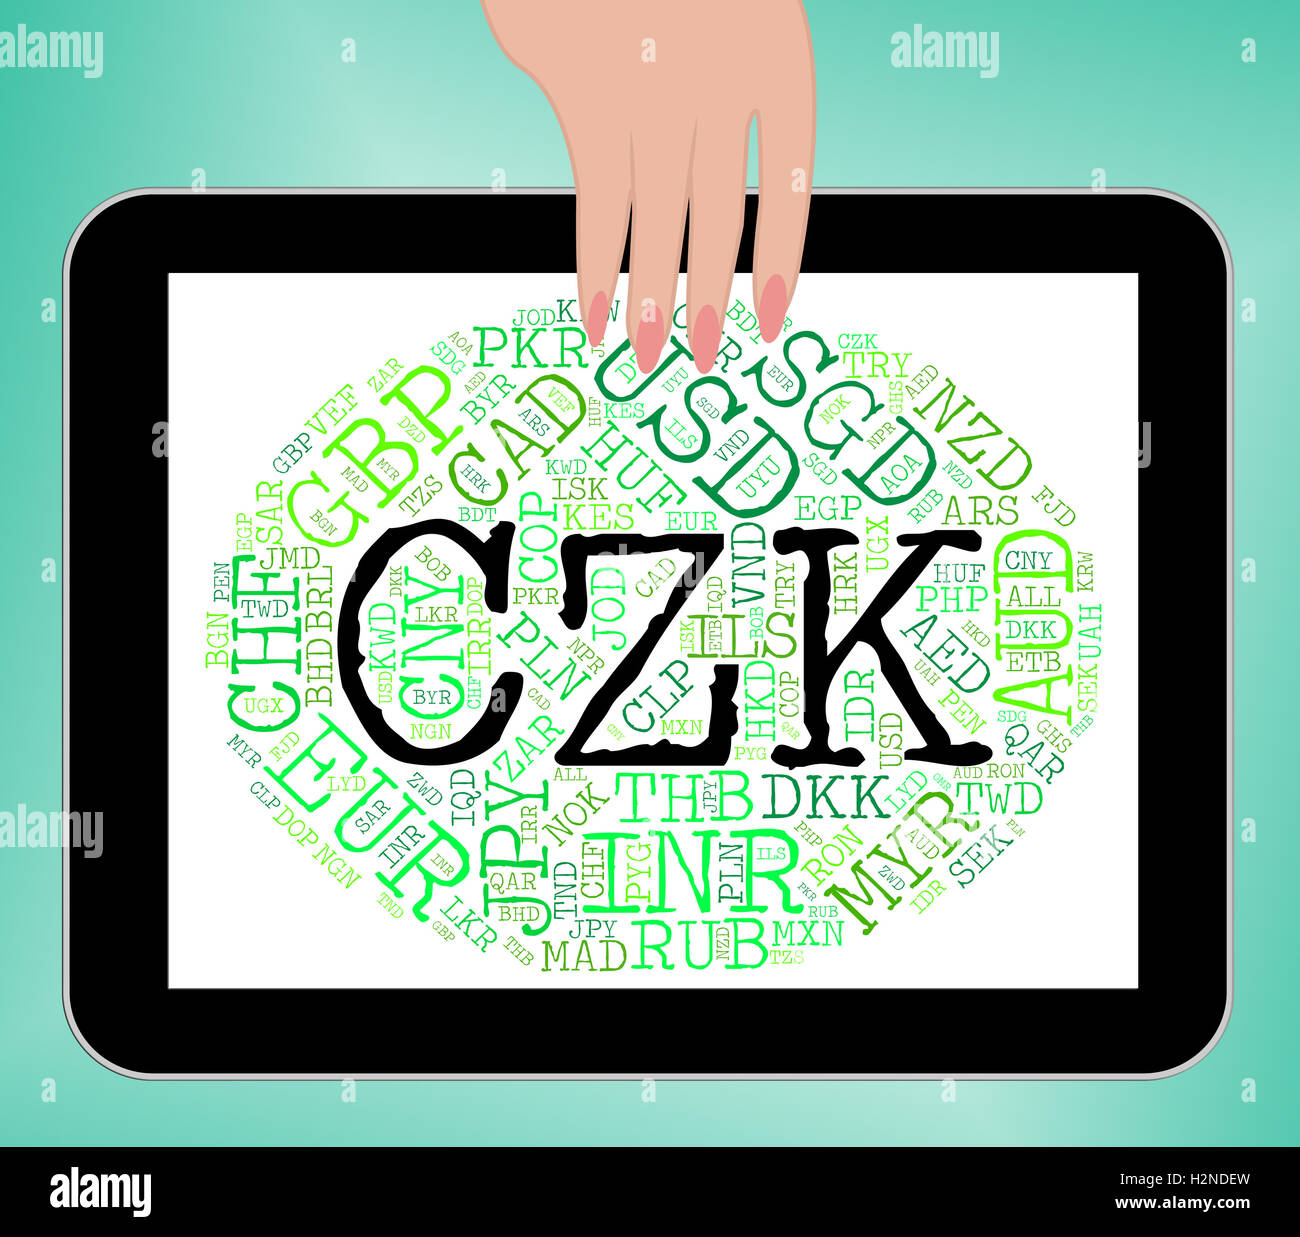 Czk Currency Meaning Czech Republic And Banknotes Stock Photo